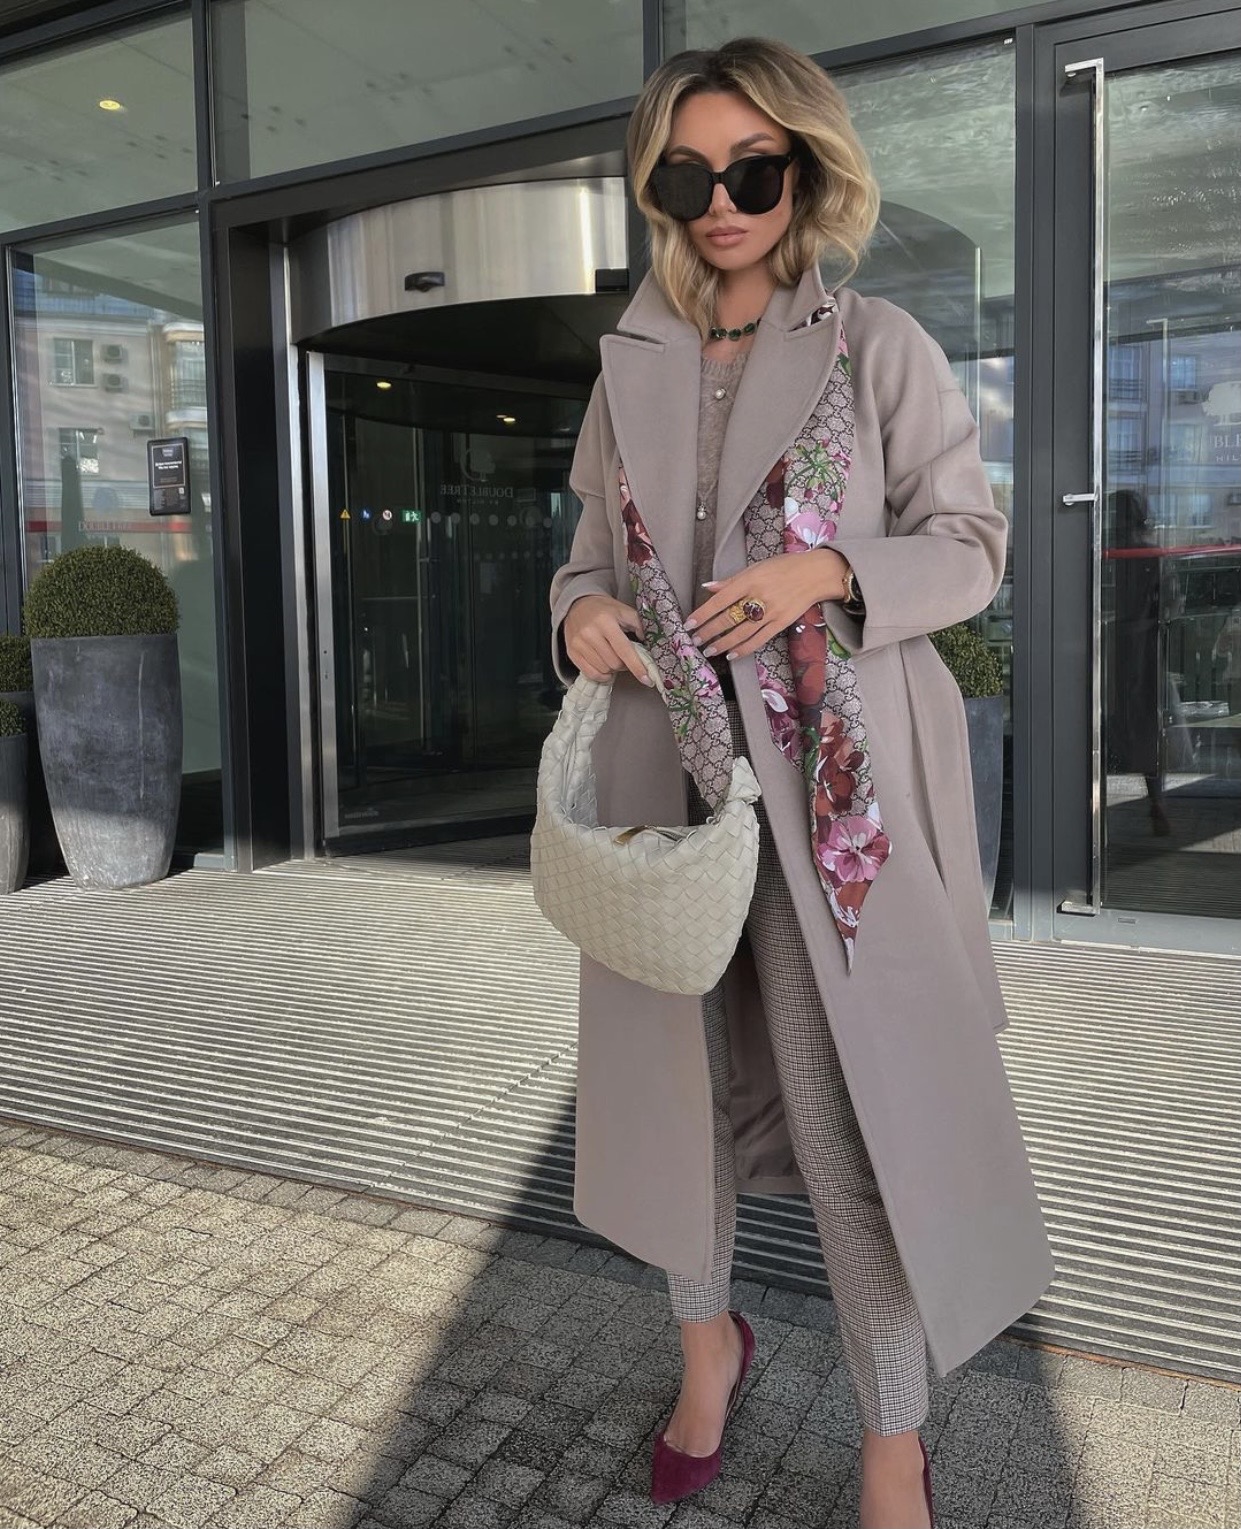 Victoria fox in a casual chic neutral outfit - Slaylebrity